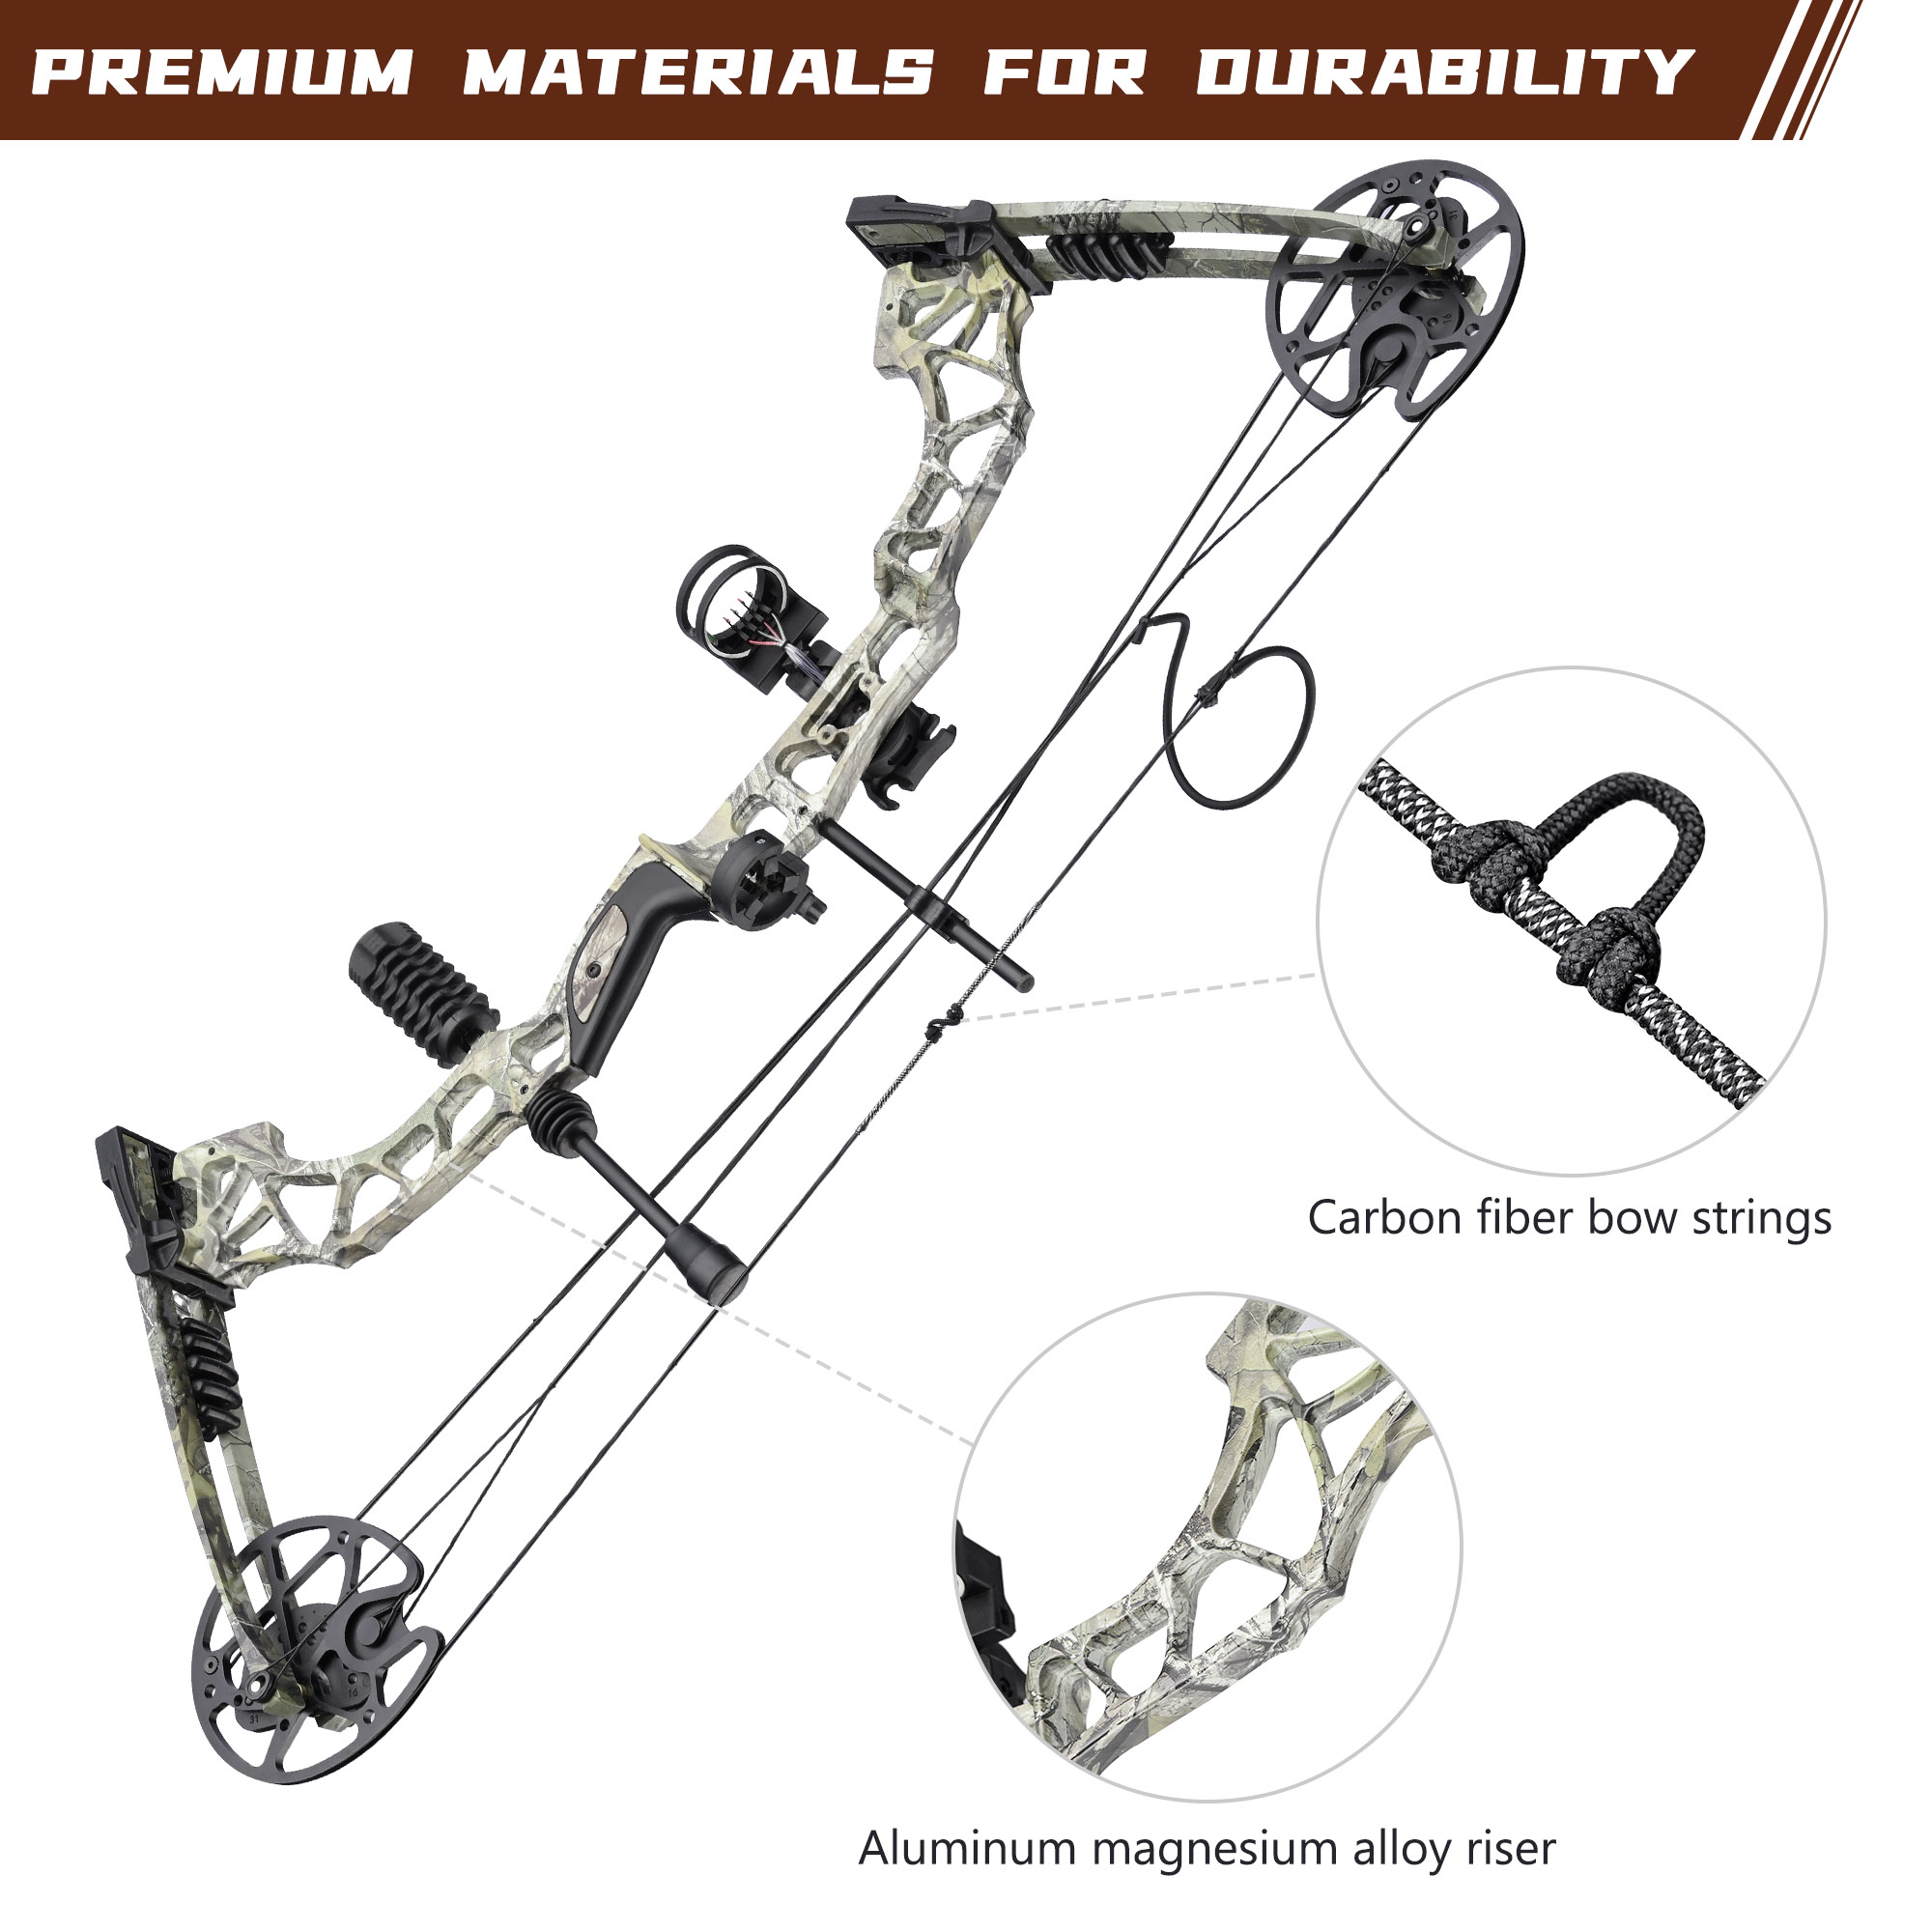 Yescom Compound Bow Kit Draw Weight 35-70 Lbs Fit Adult Professional Hunting Bow Target Practice Arrow Archery, Camo